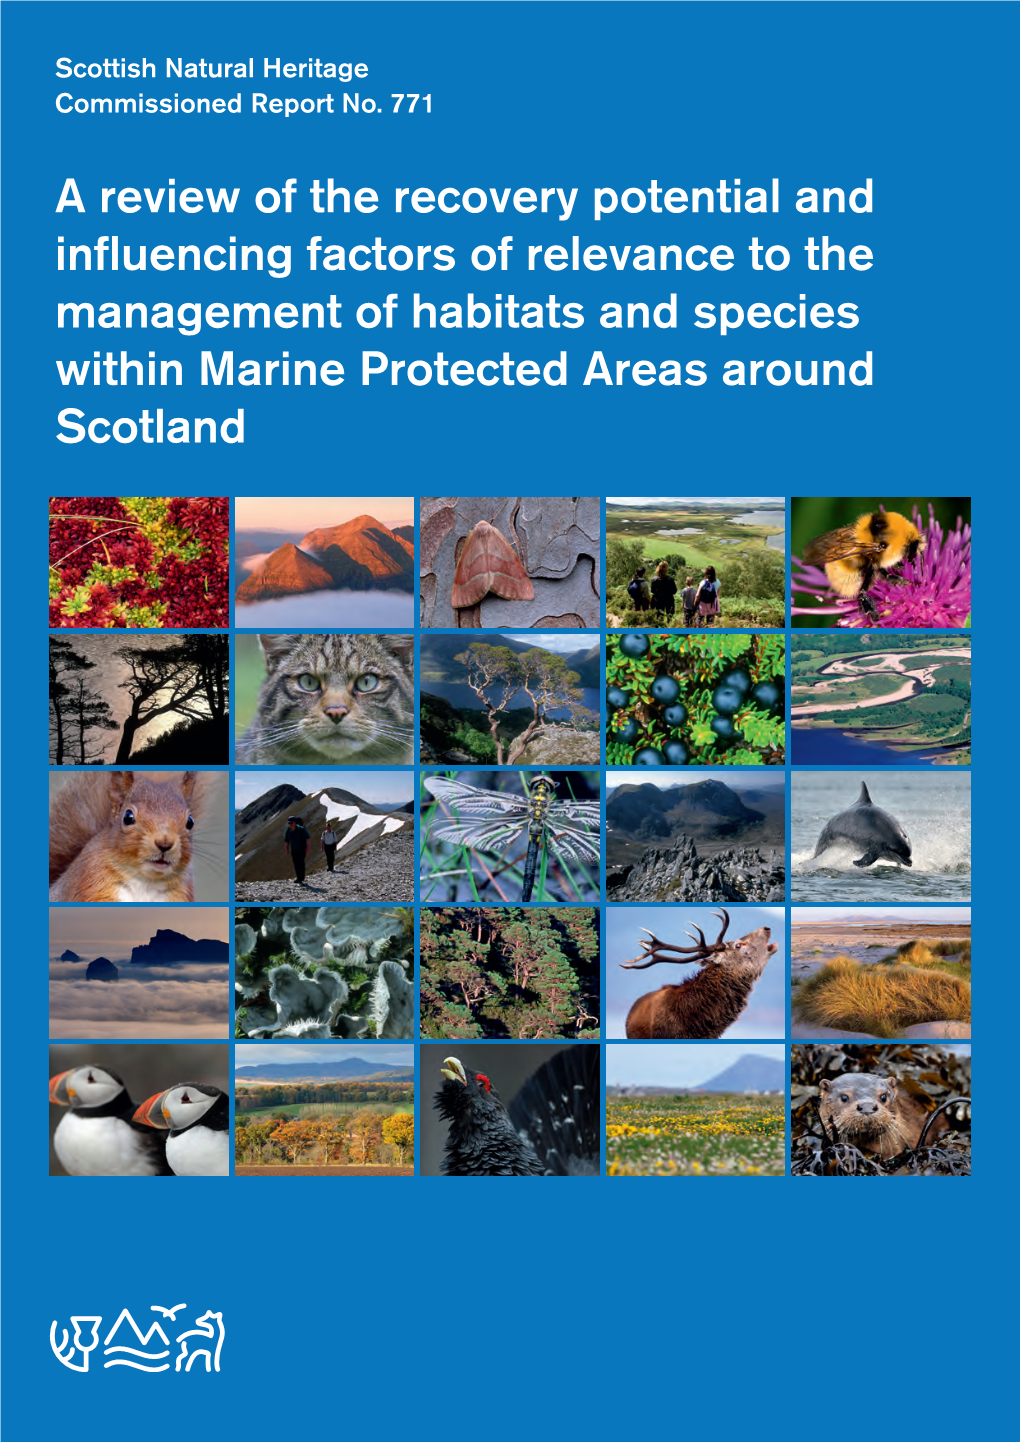 A Review of the Recovery Potential and Influencing Factors of Relevance to the Management of Habitats and Species Within Marine Protected Areas Around Scotland